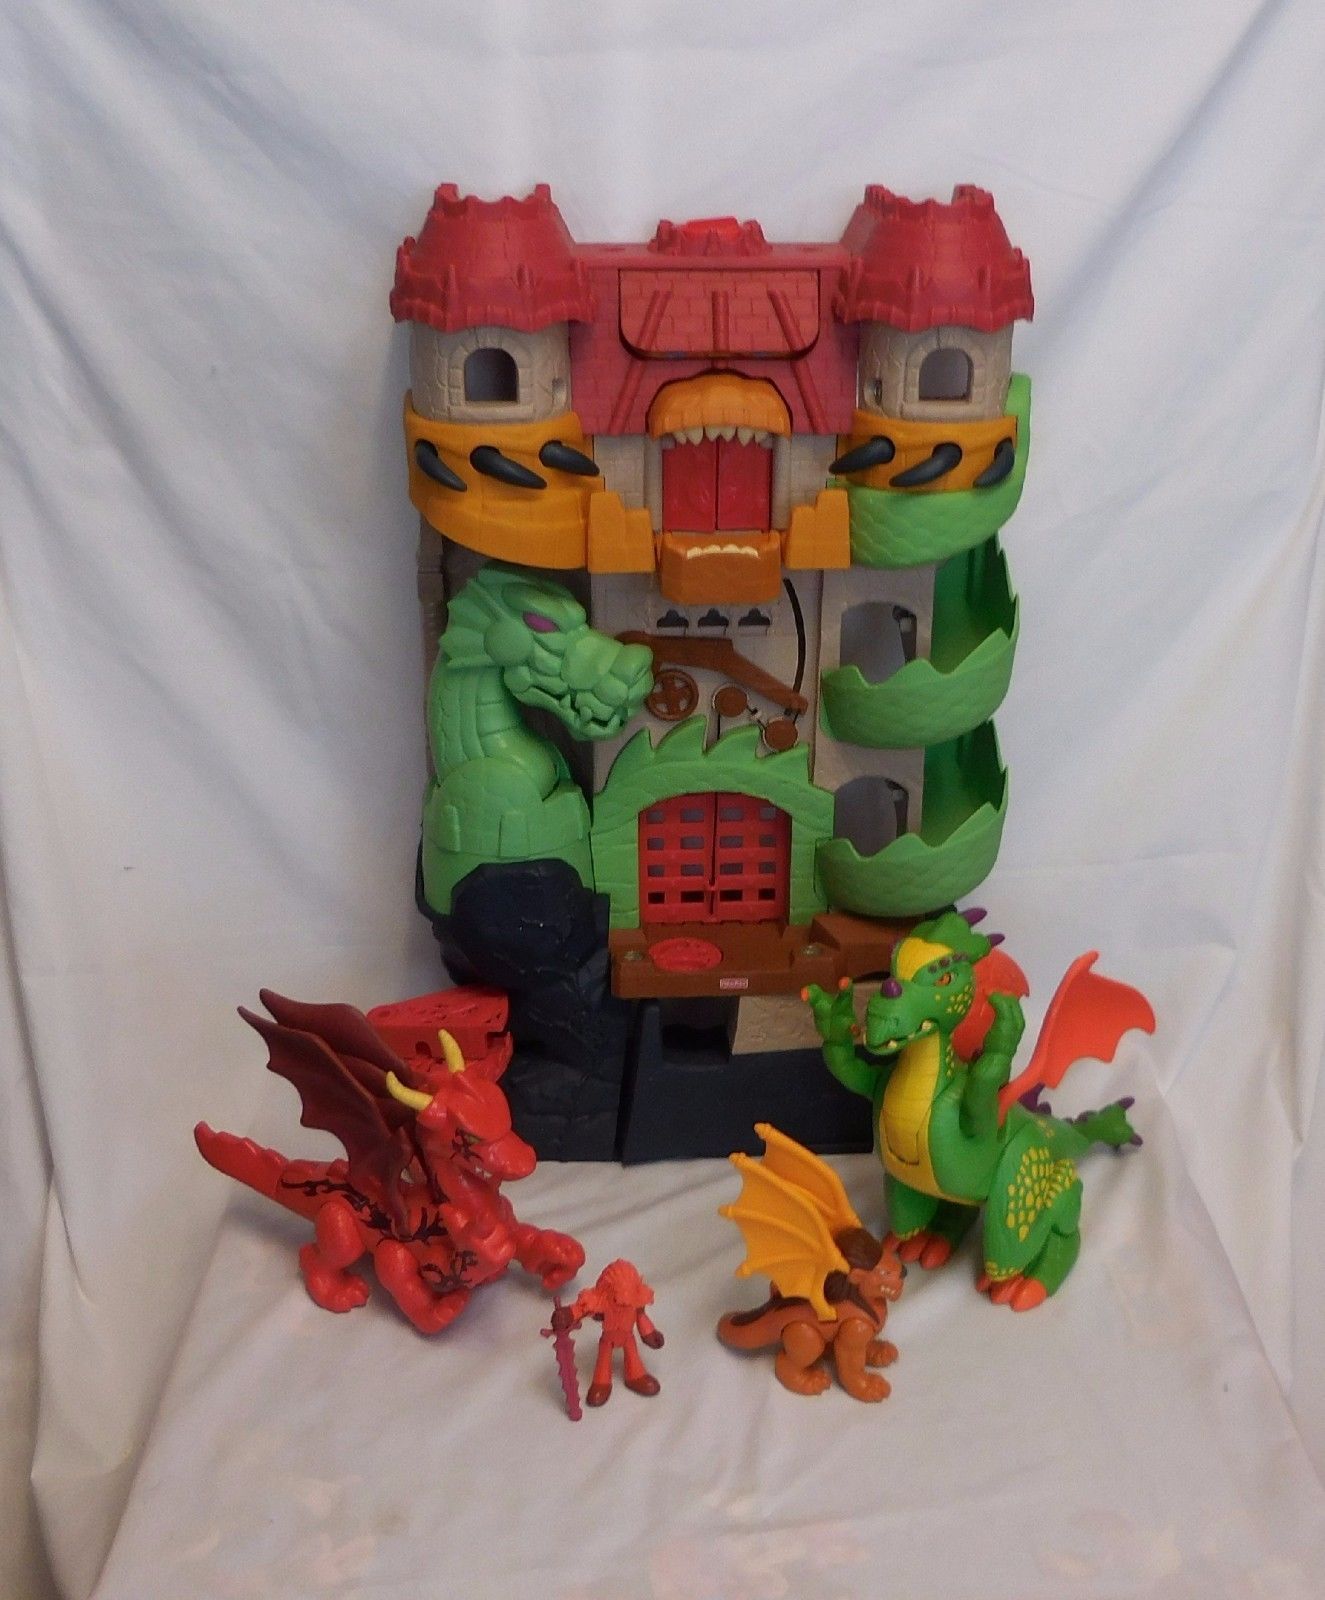 Details about   2004 Mattel Fisher-Price Imaginext Red Dragon Toy Figure Lord Dragomont Fortress 